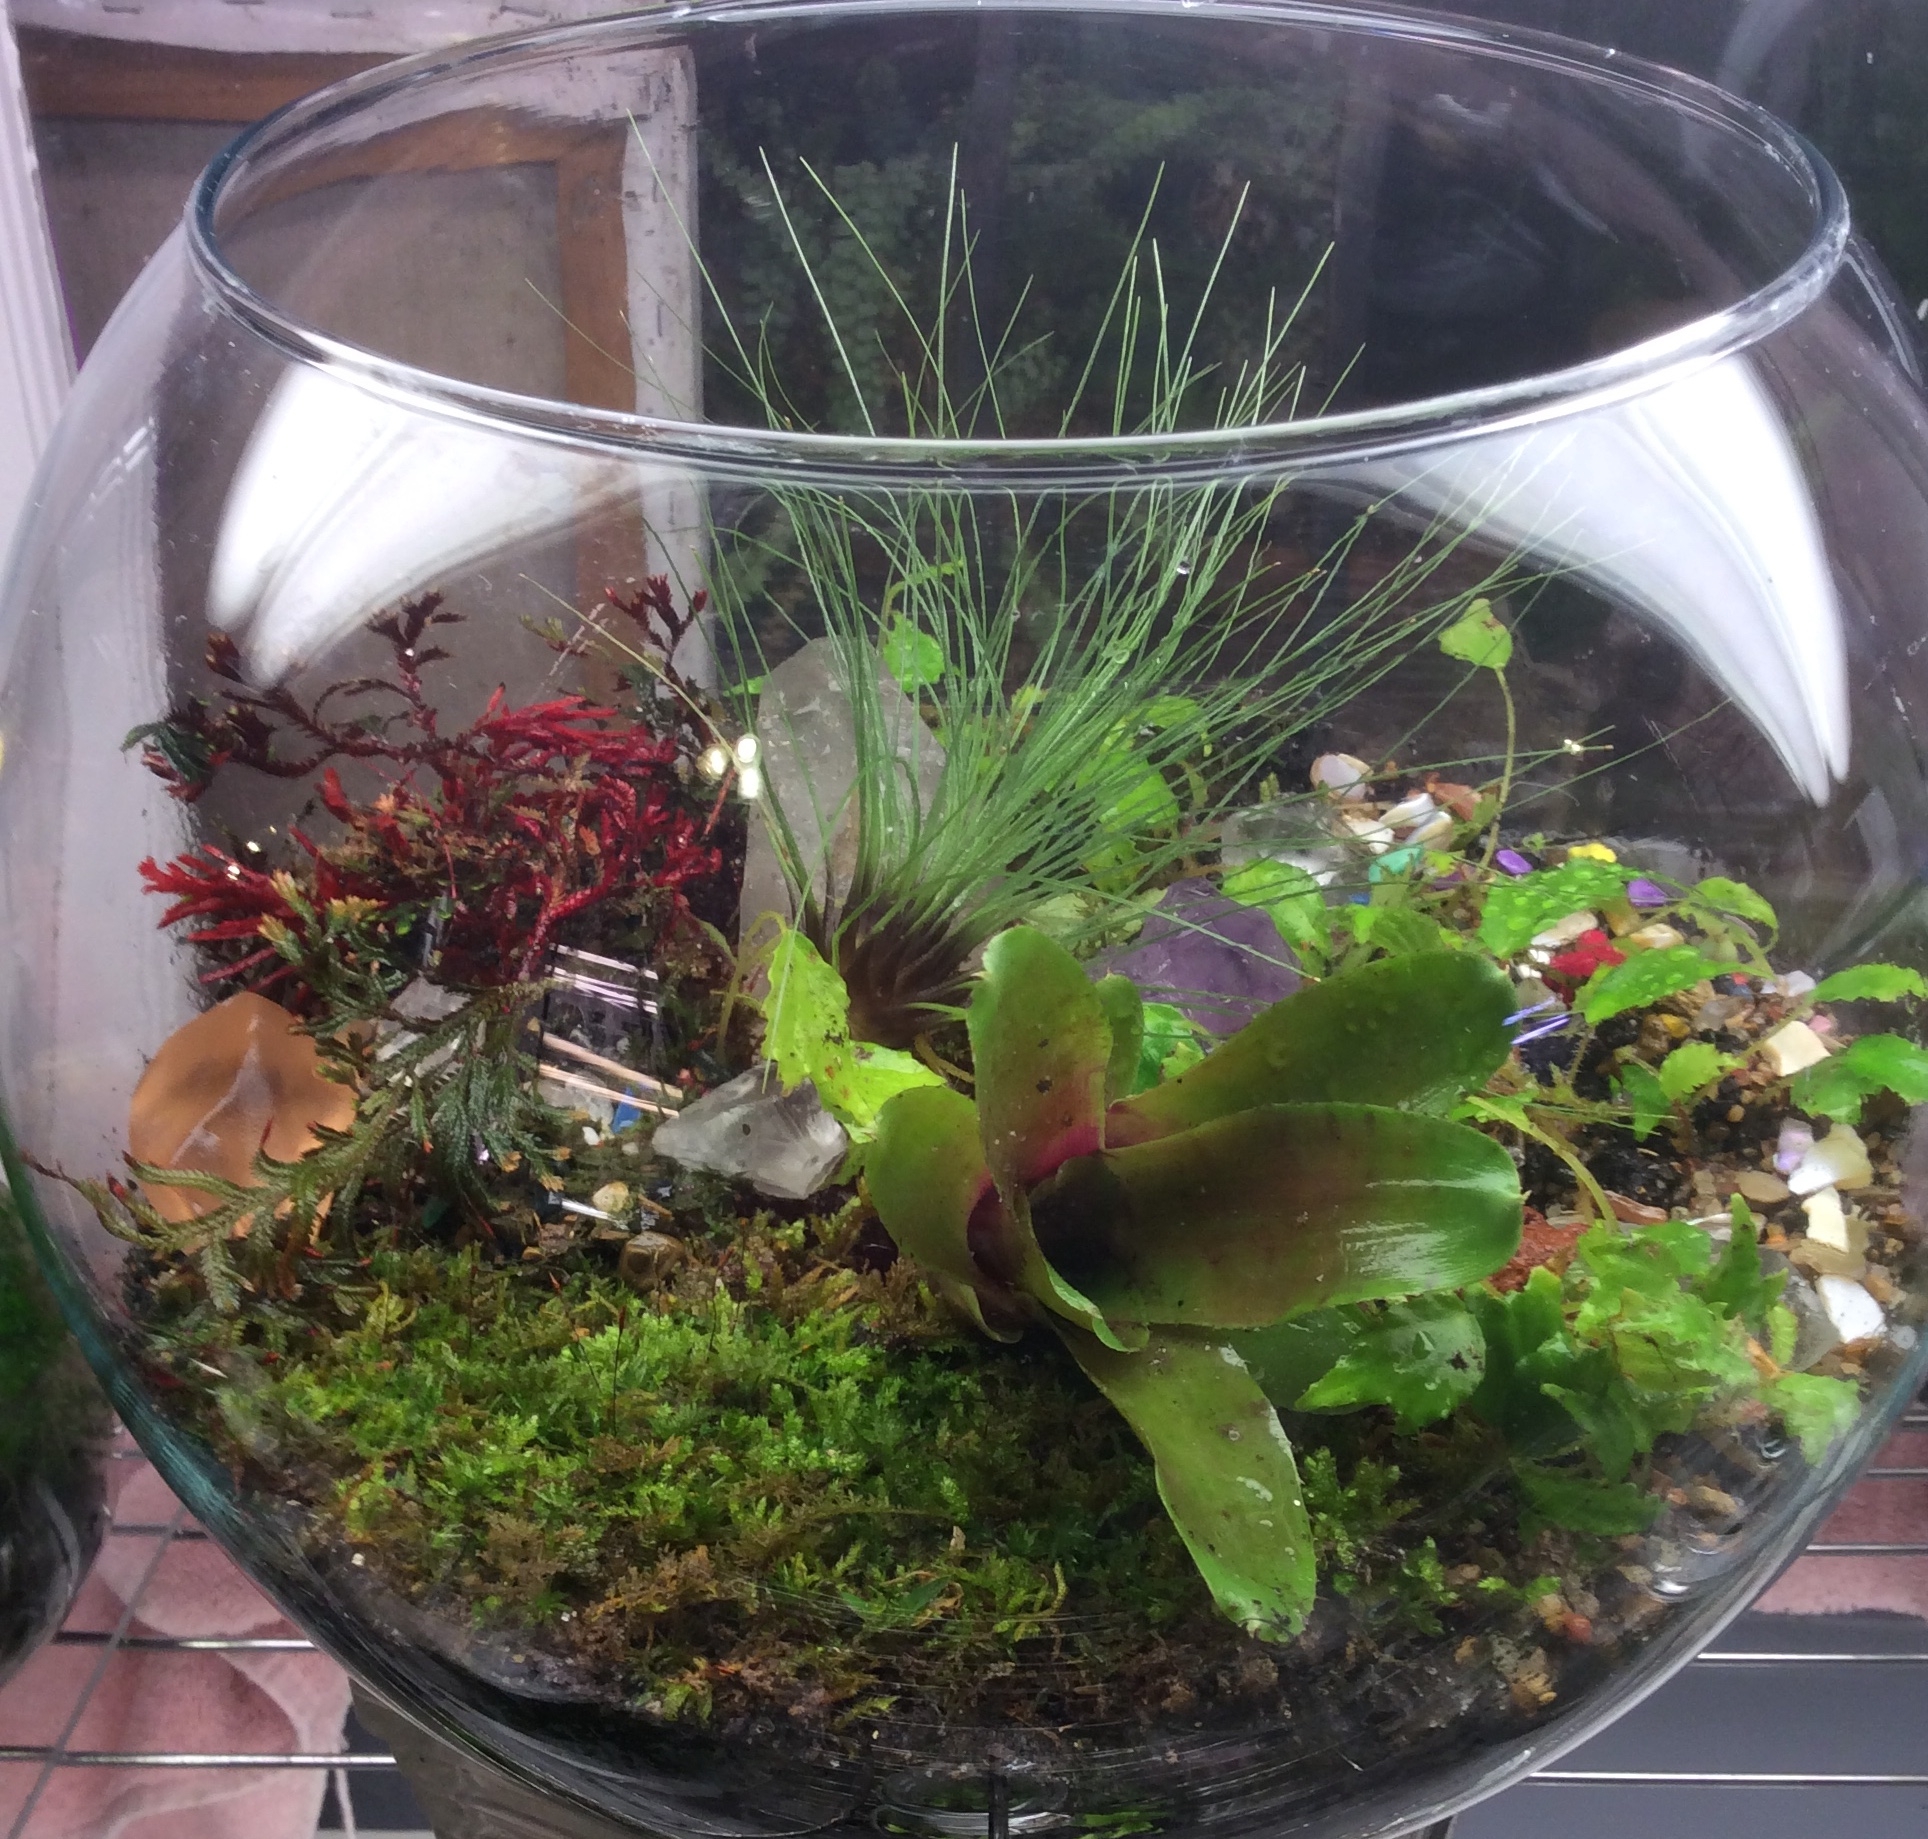 Build Your Own Terrarium March 10 and 11, 2018